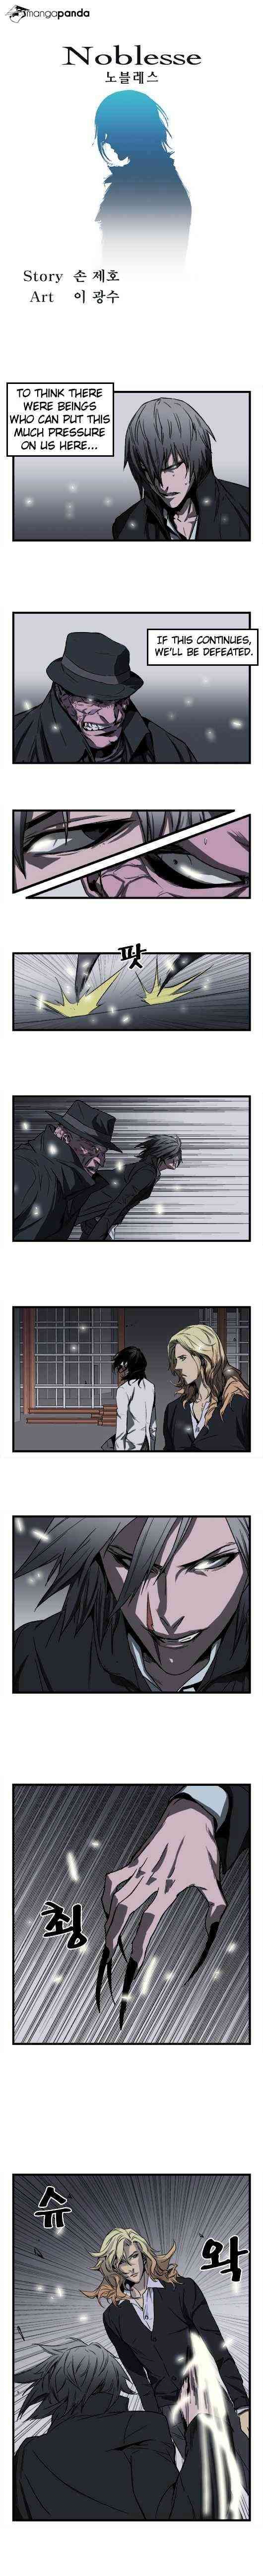 Noblesse Chapter 32 page 1